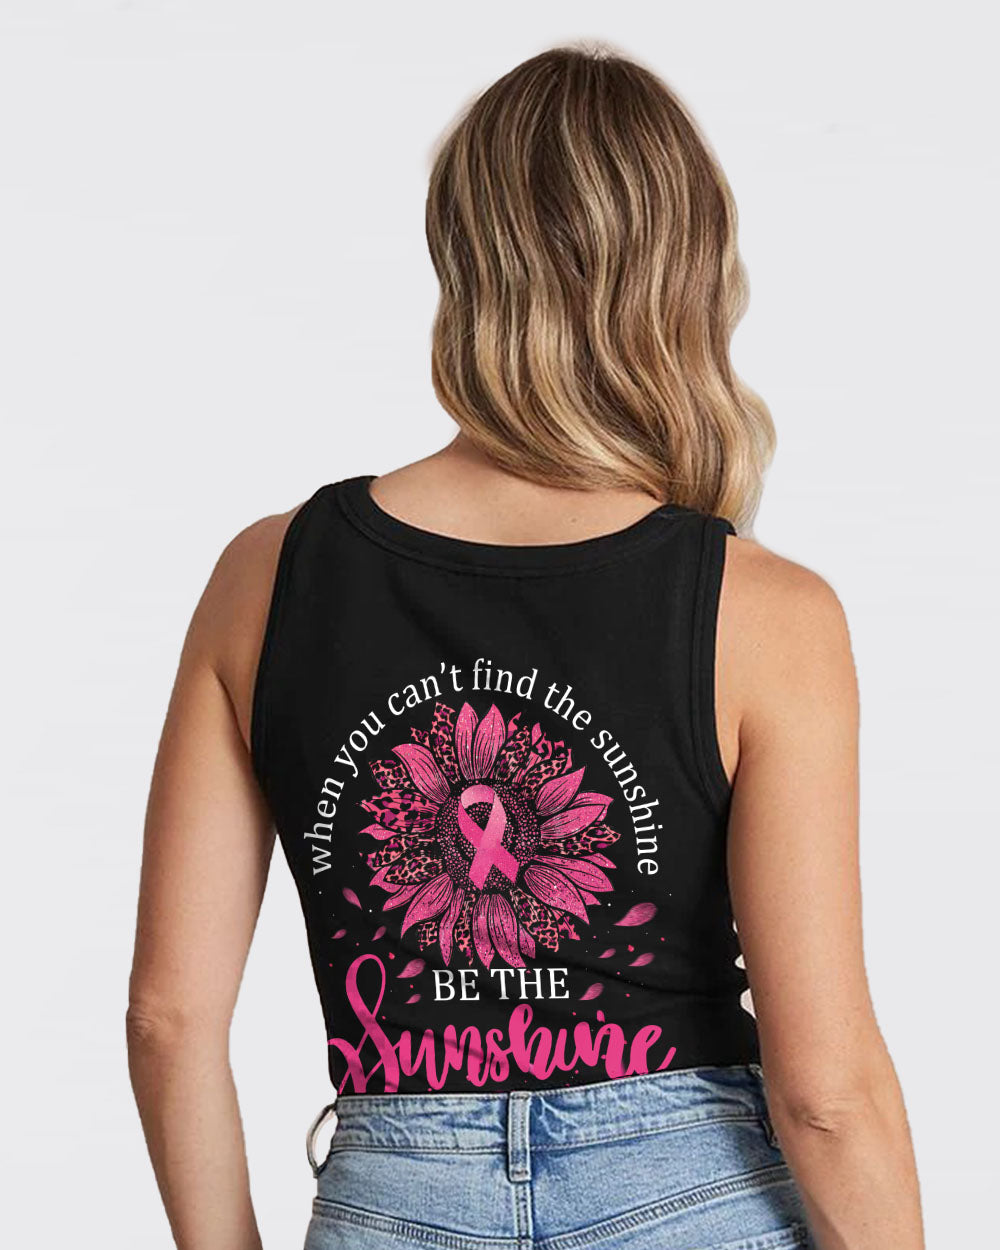 When You Can't Find The Sunshine Women's Breast Cancer Awareness Tanks